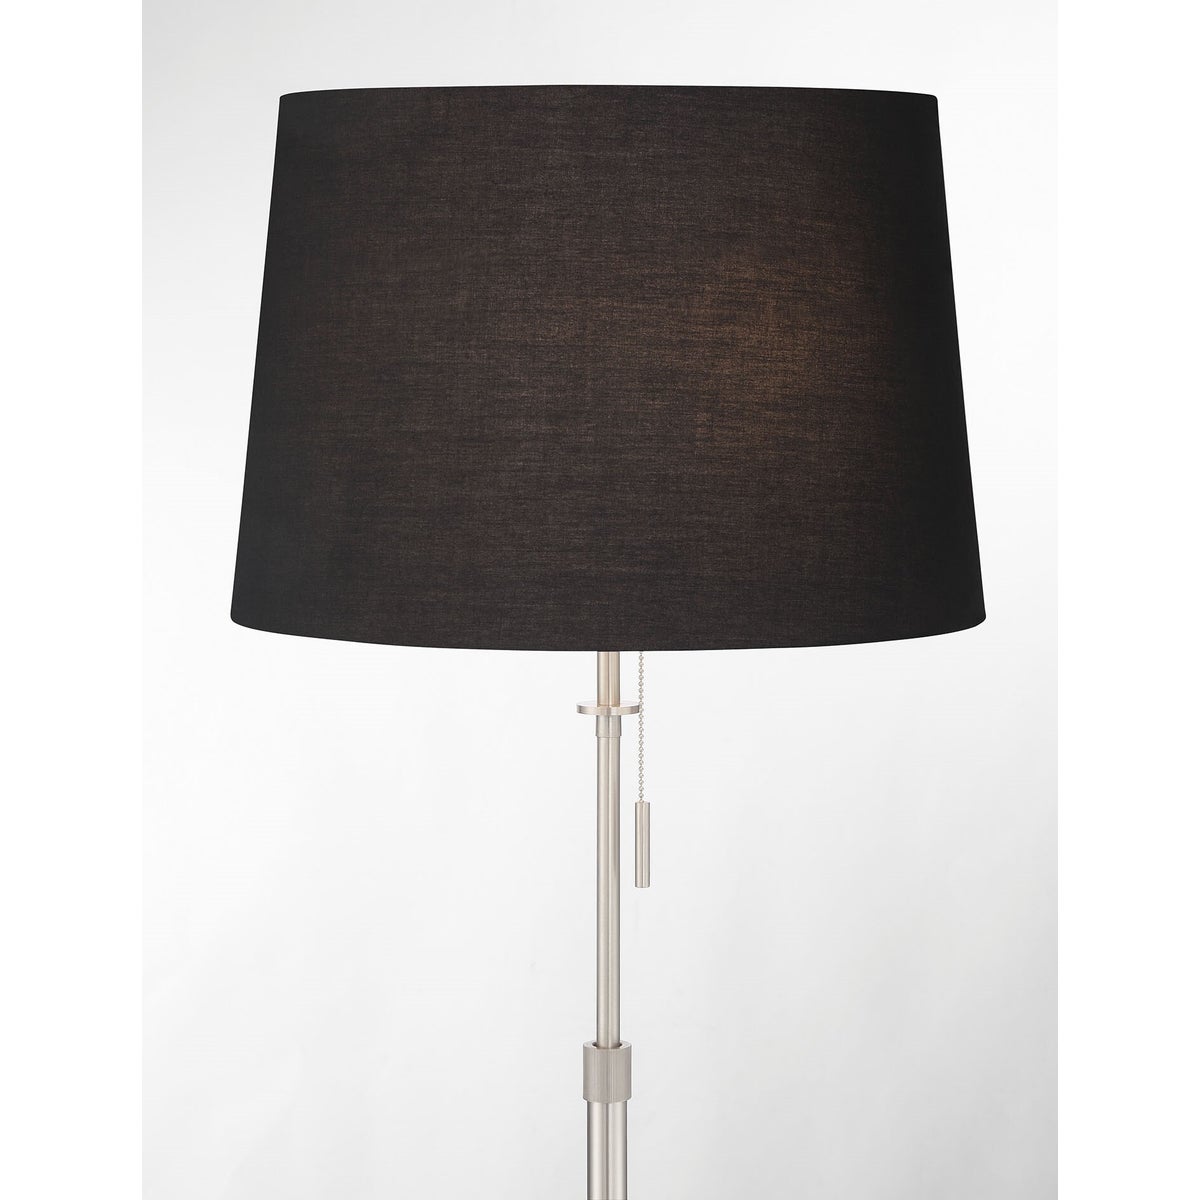 X3 Floor Lamp in Satin Nickel with White Shade